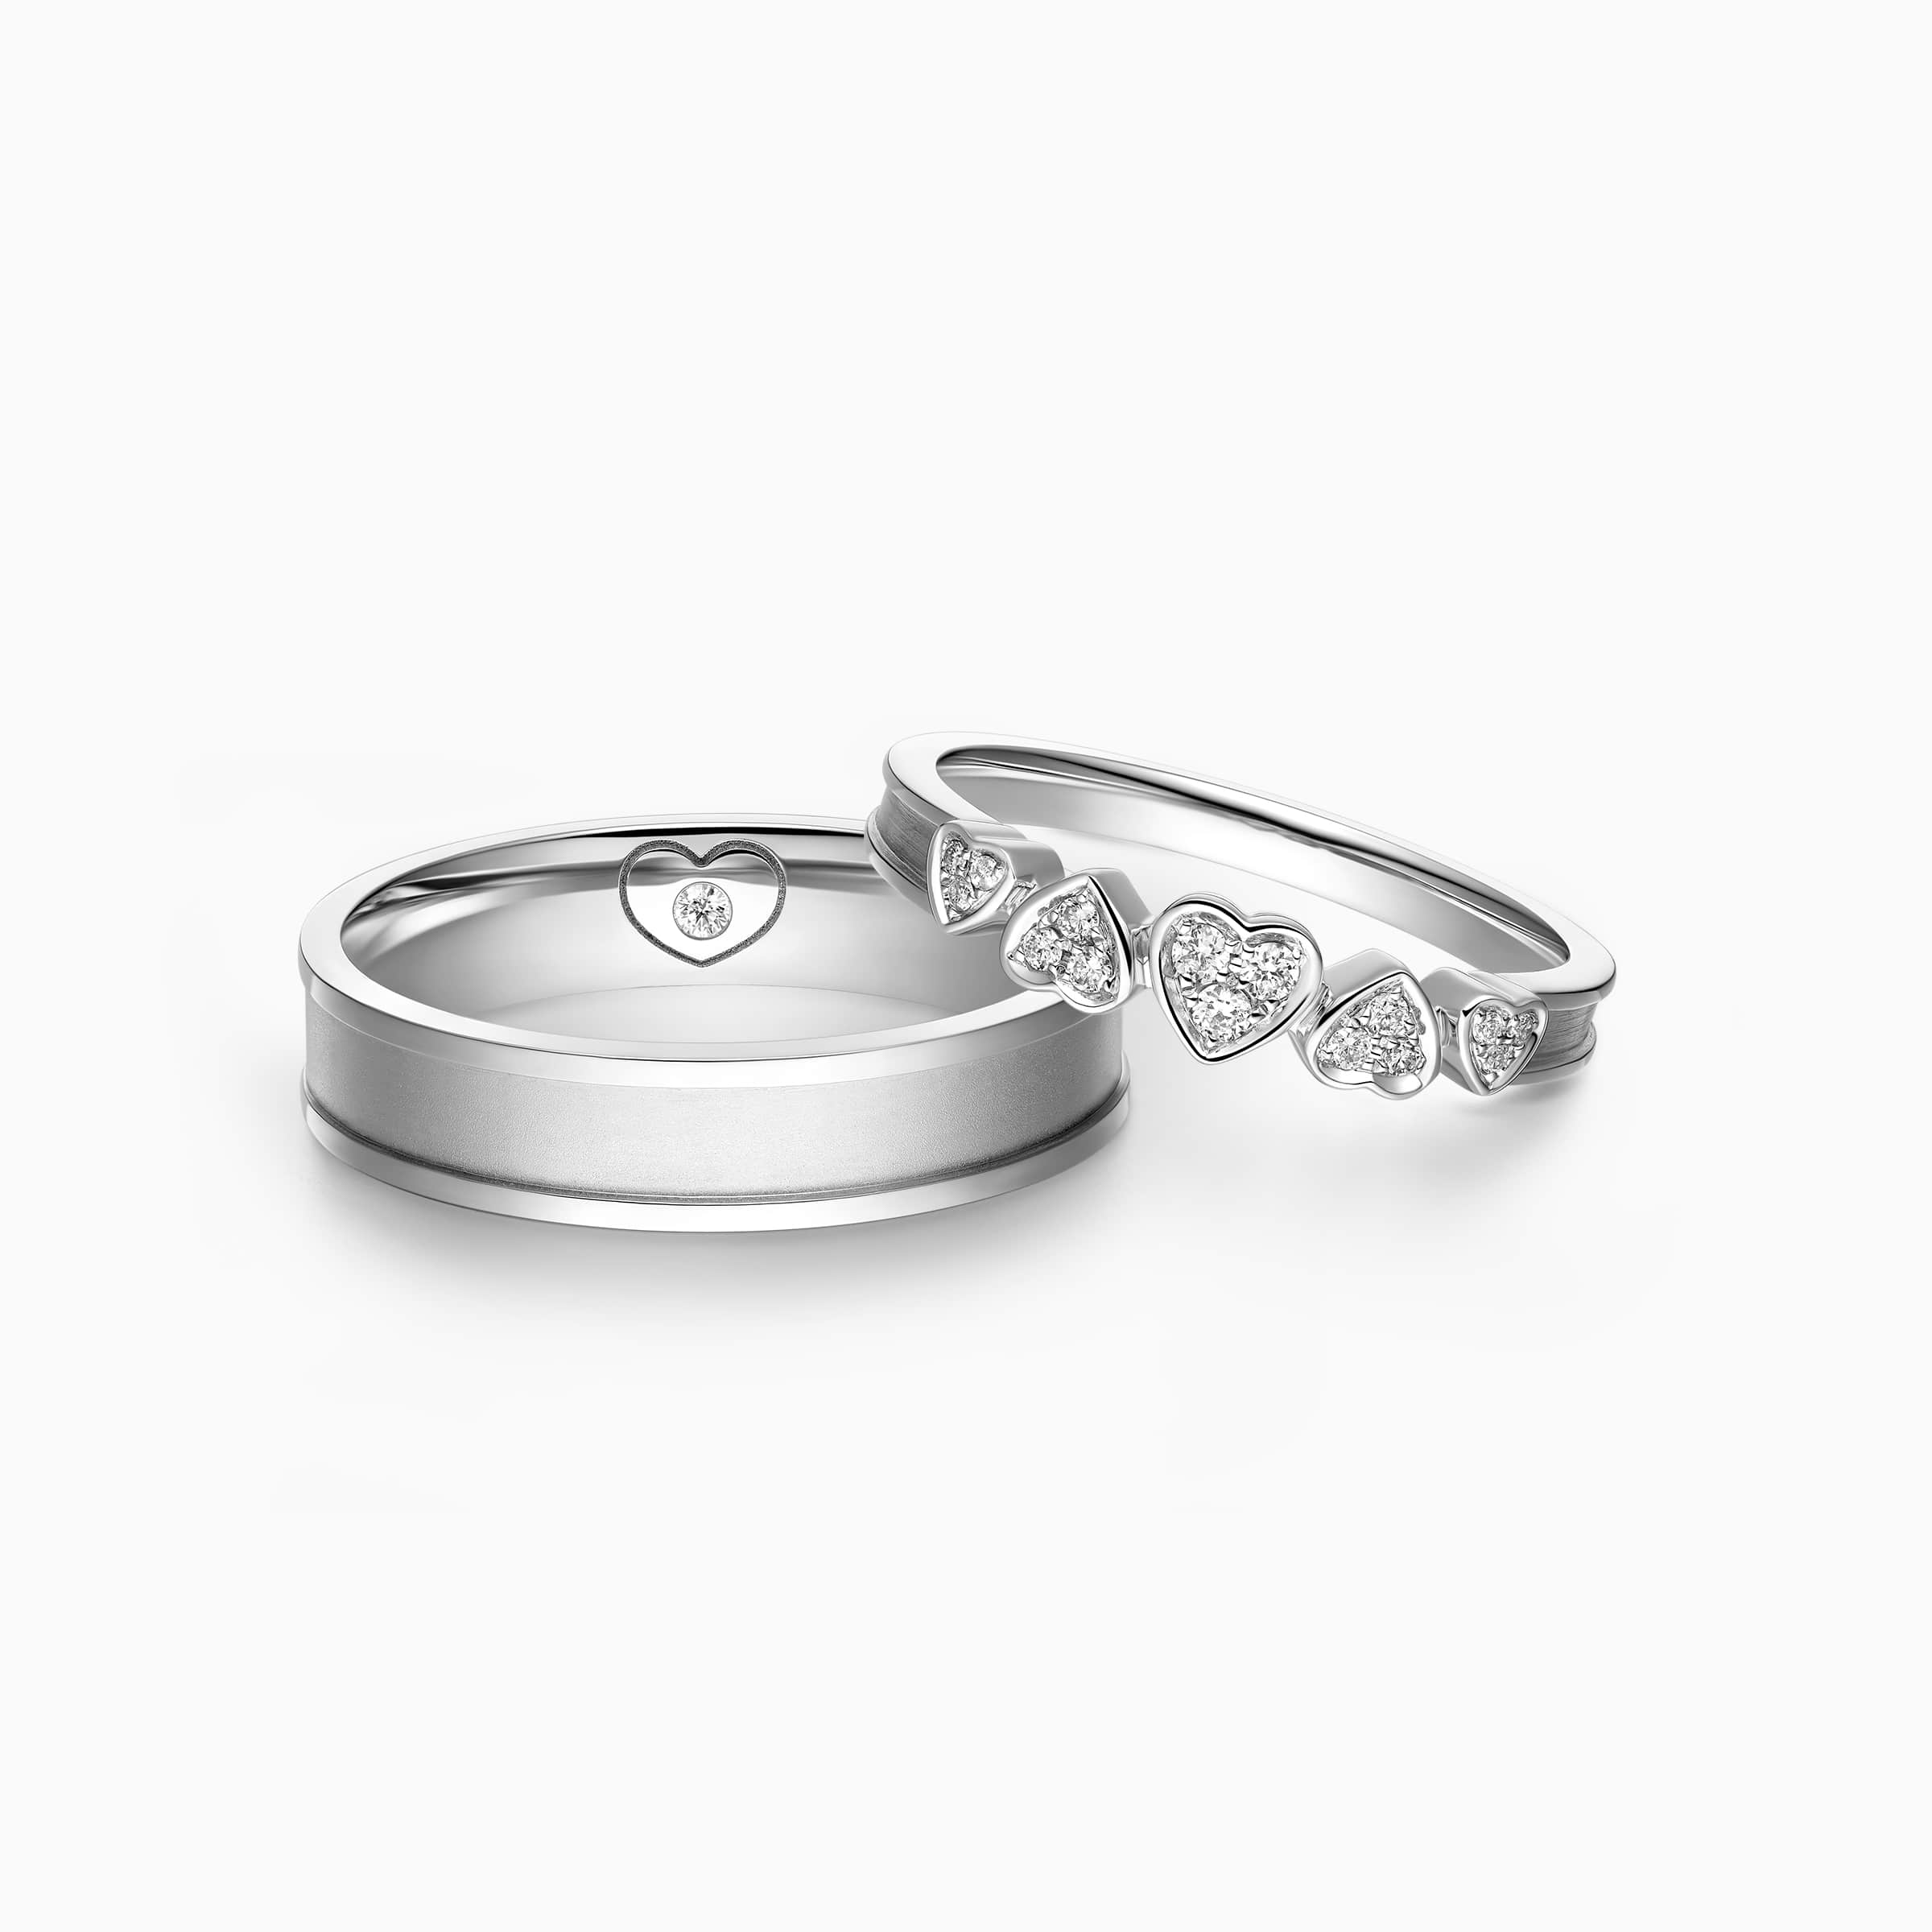 Darry Ring heart wedding ring sets for him and her in platinum